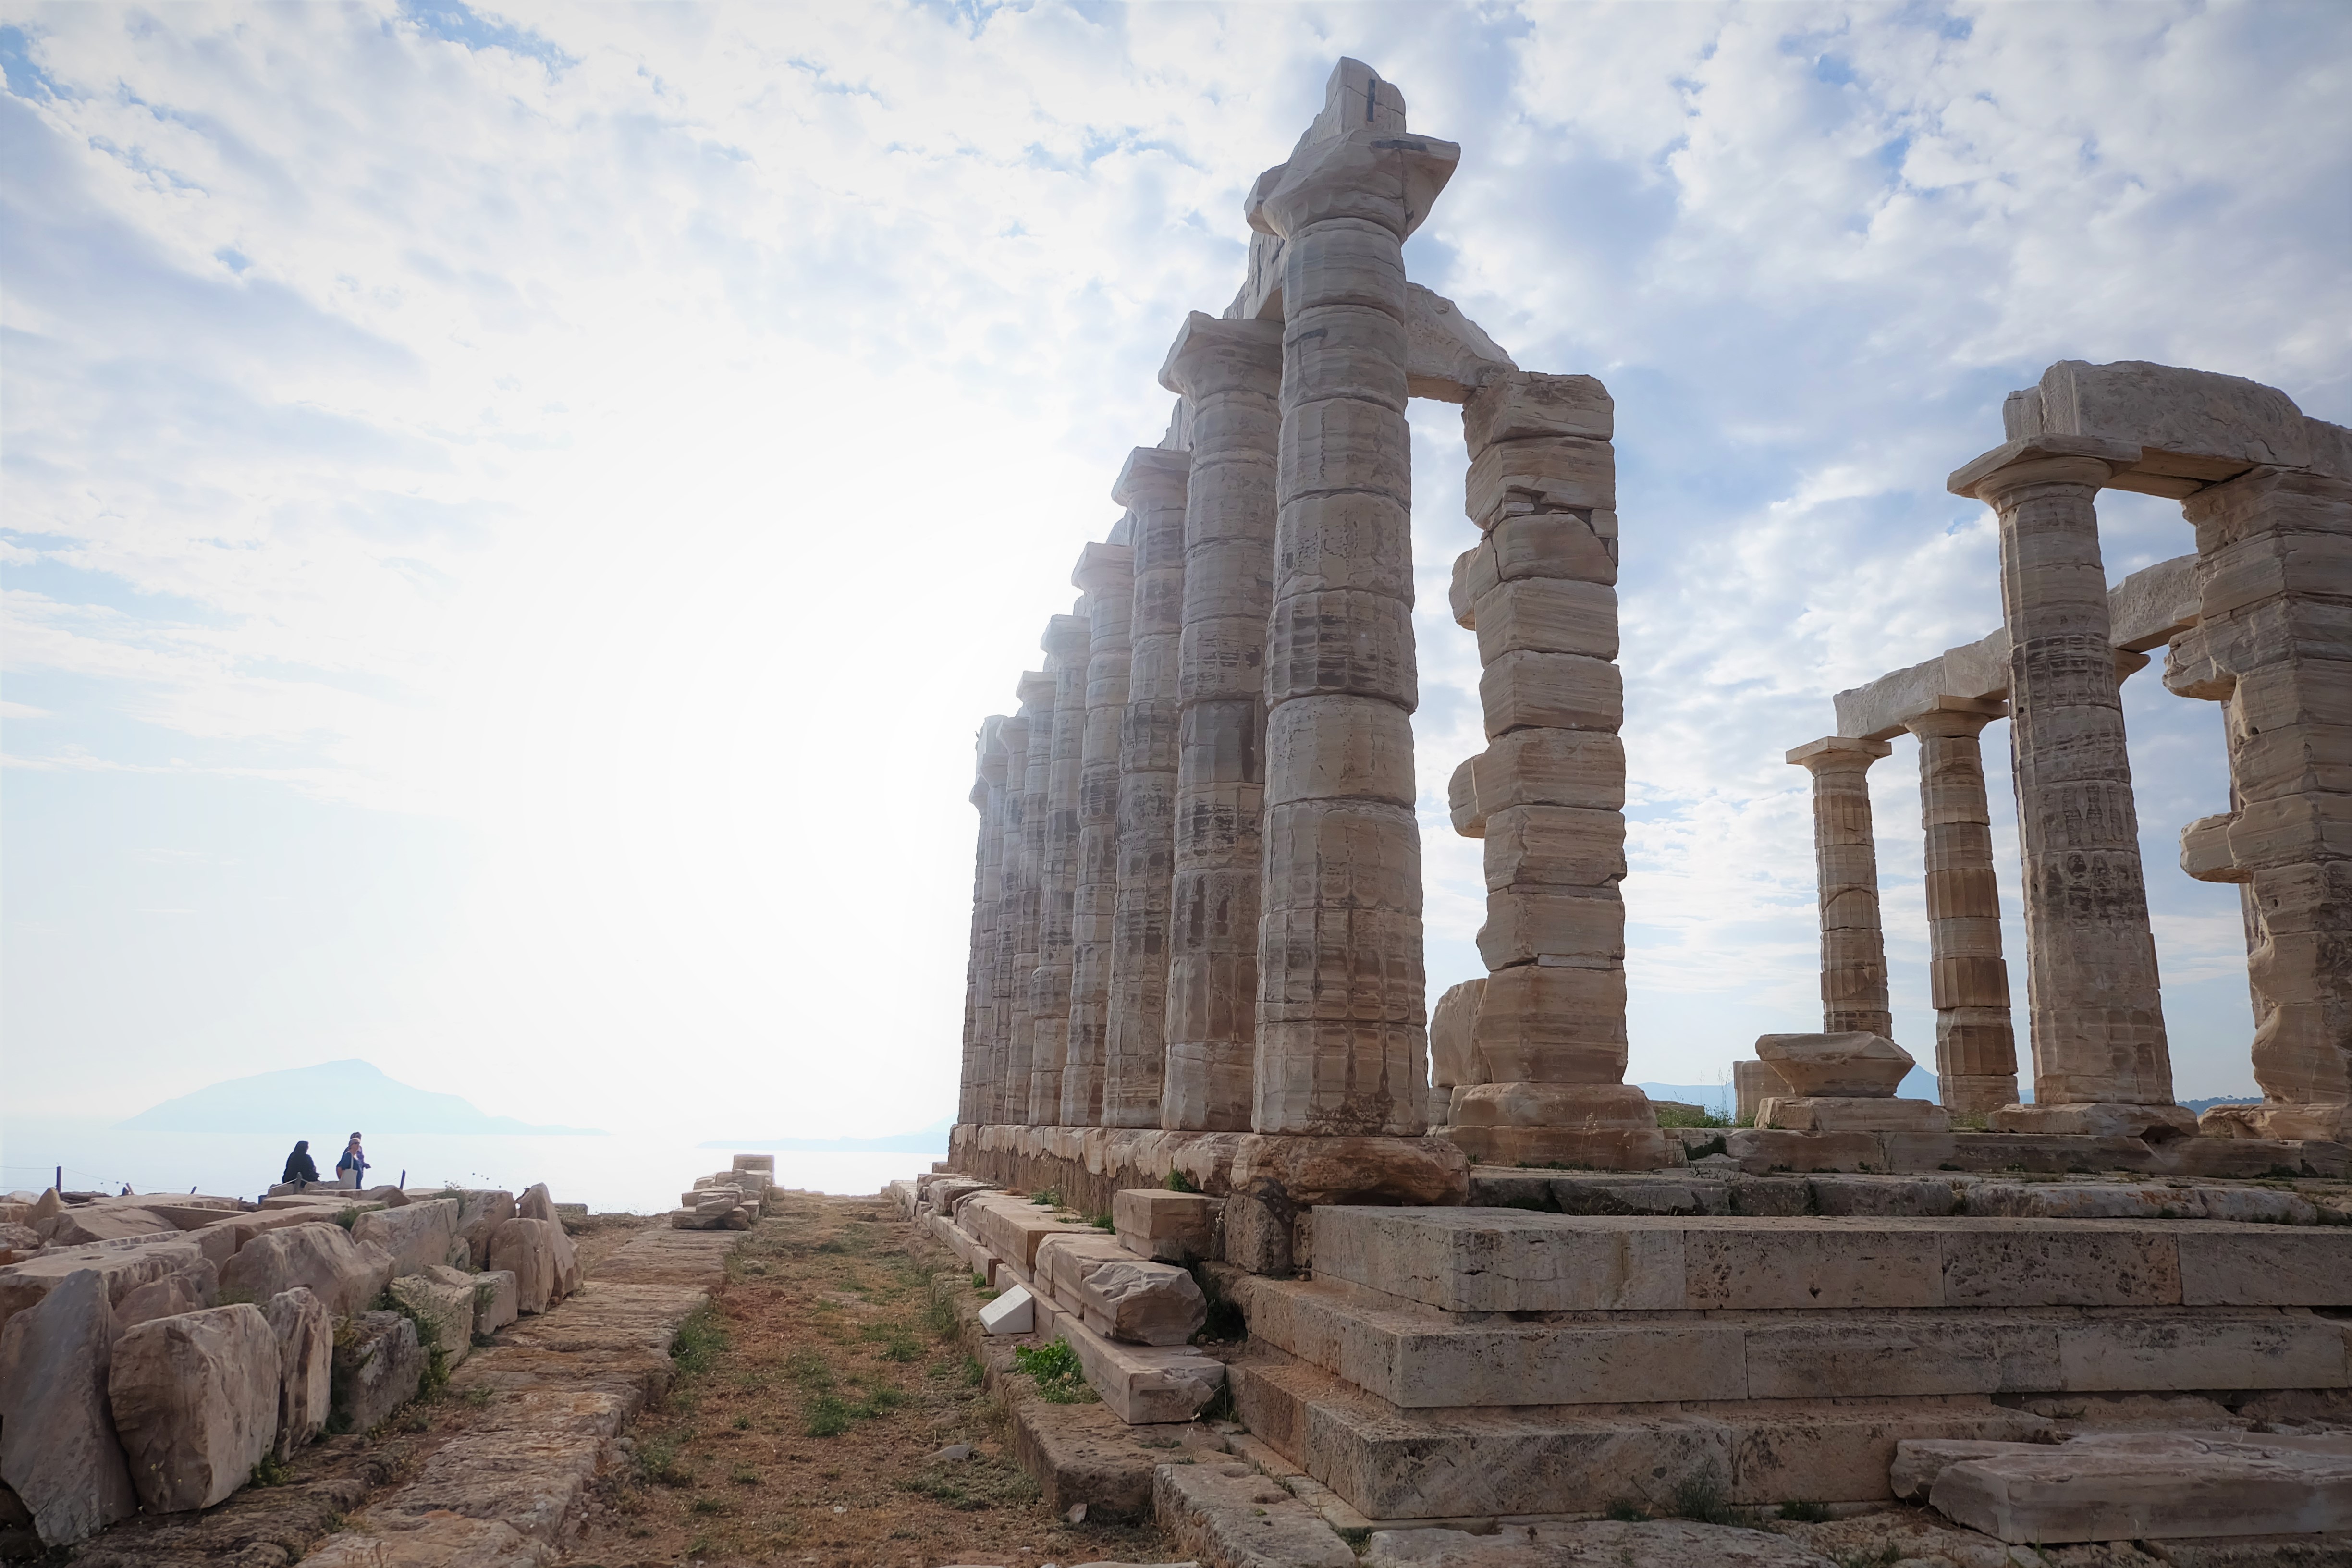 Carry It Like Harry - Watch the sun sets on the Temple of Poseidon at Cape Sounion, Greece